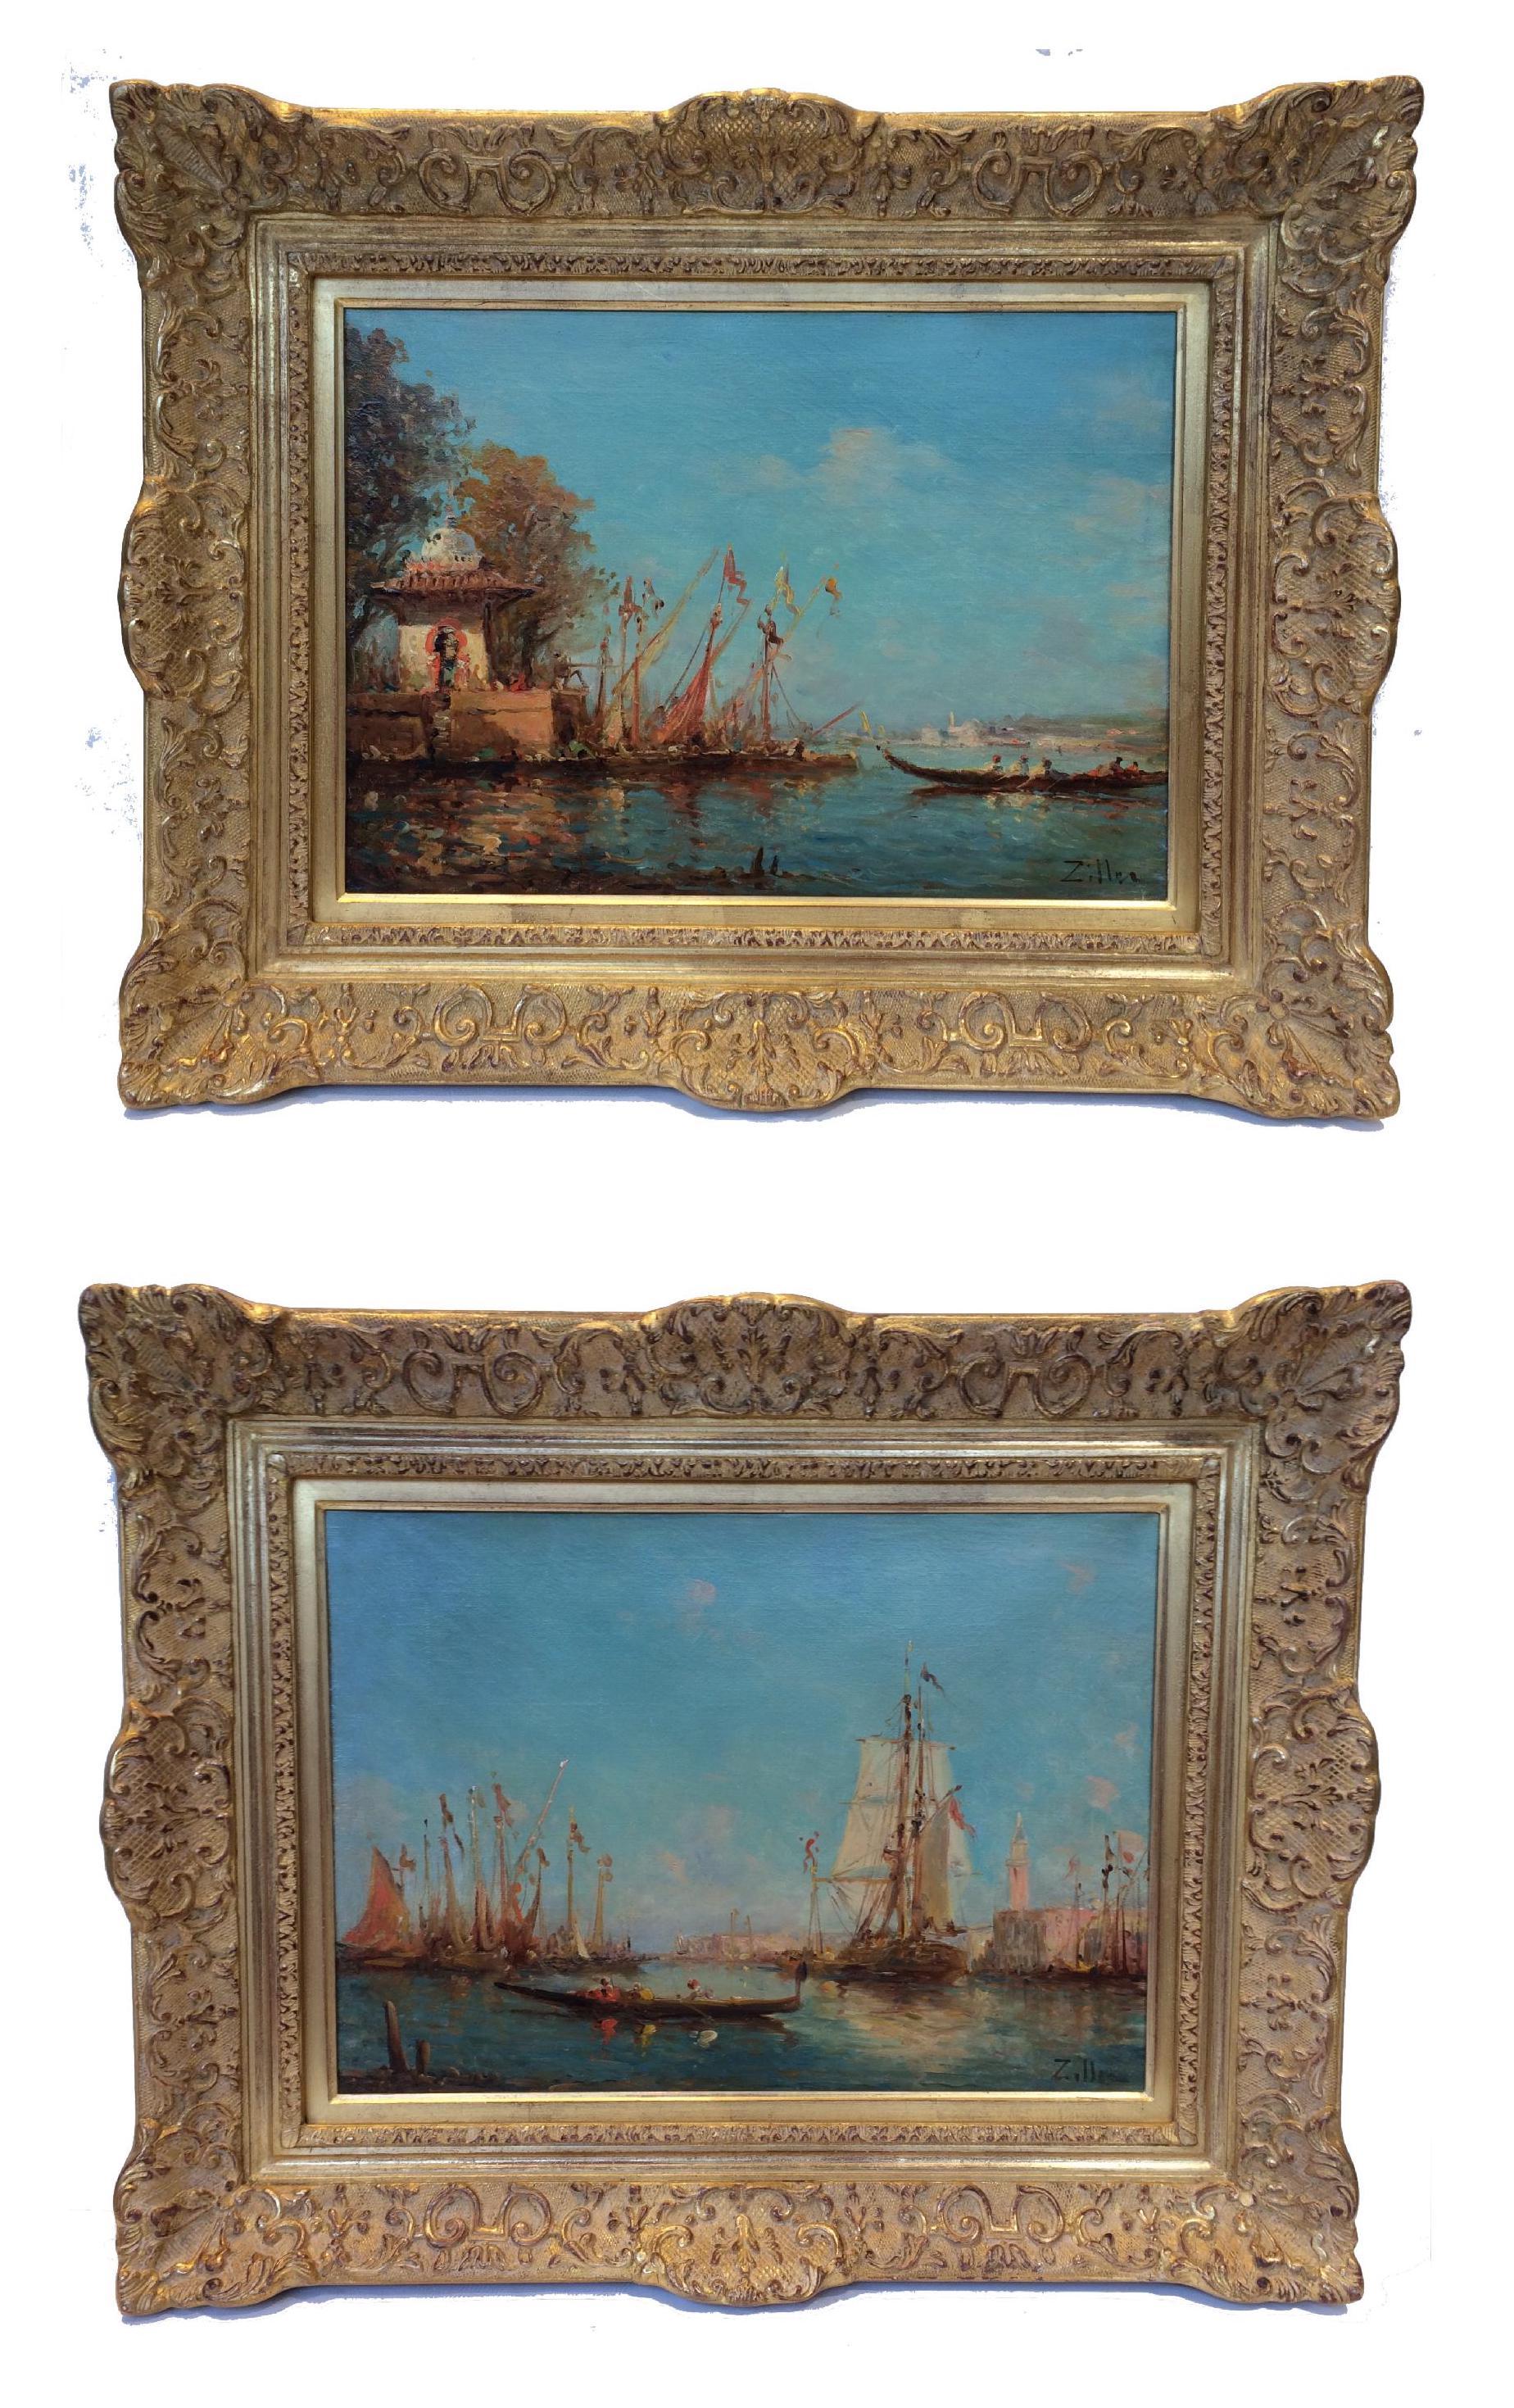 Leopold Ziller Landscape Painting - Views of Venice And Istambul in Pair - 19th century Paintings